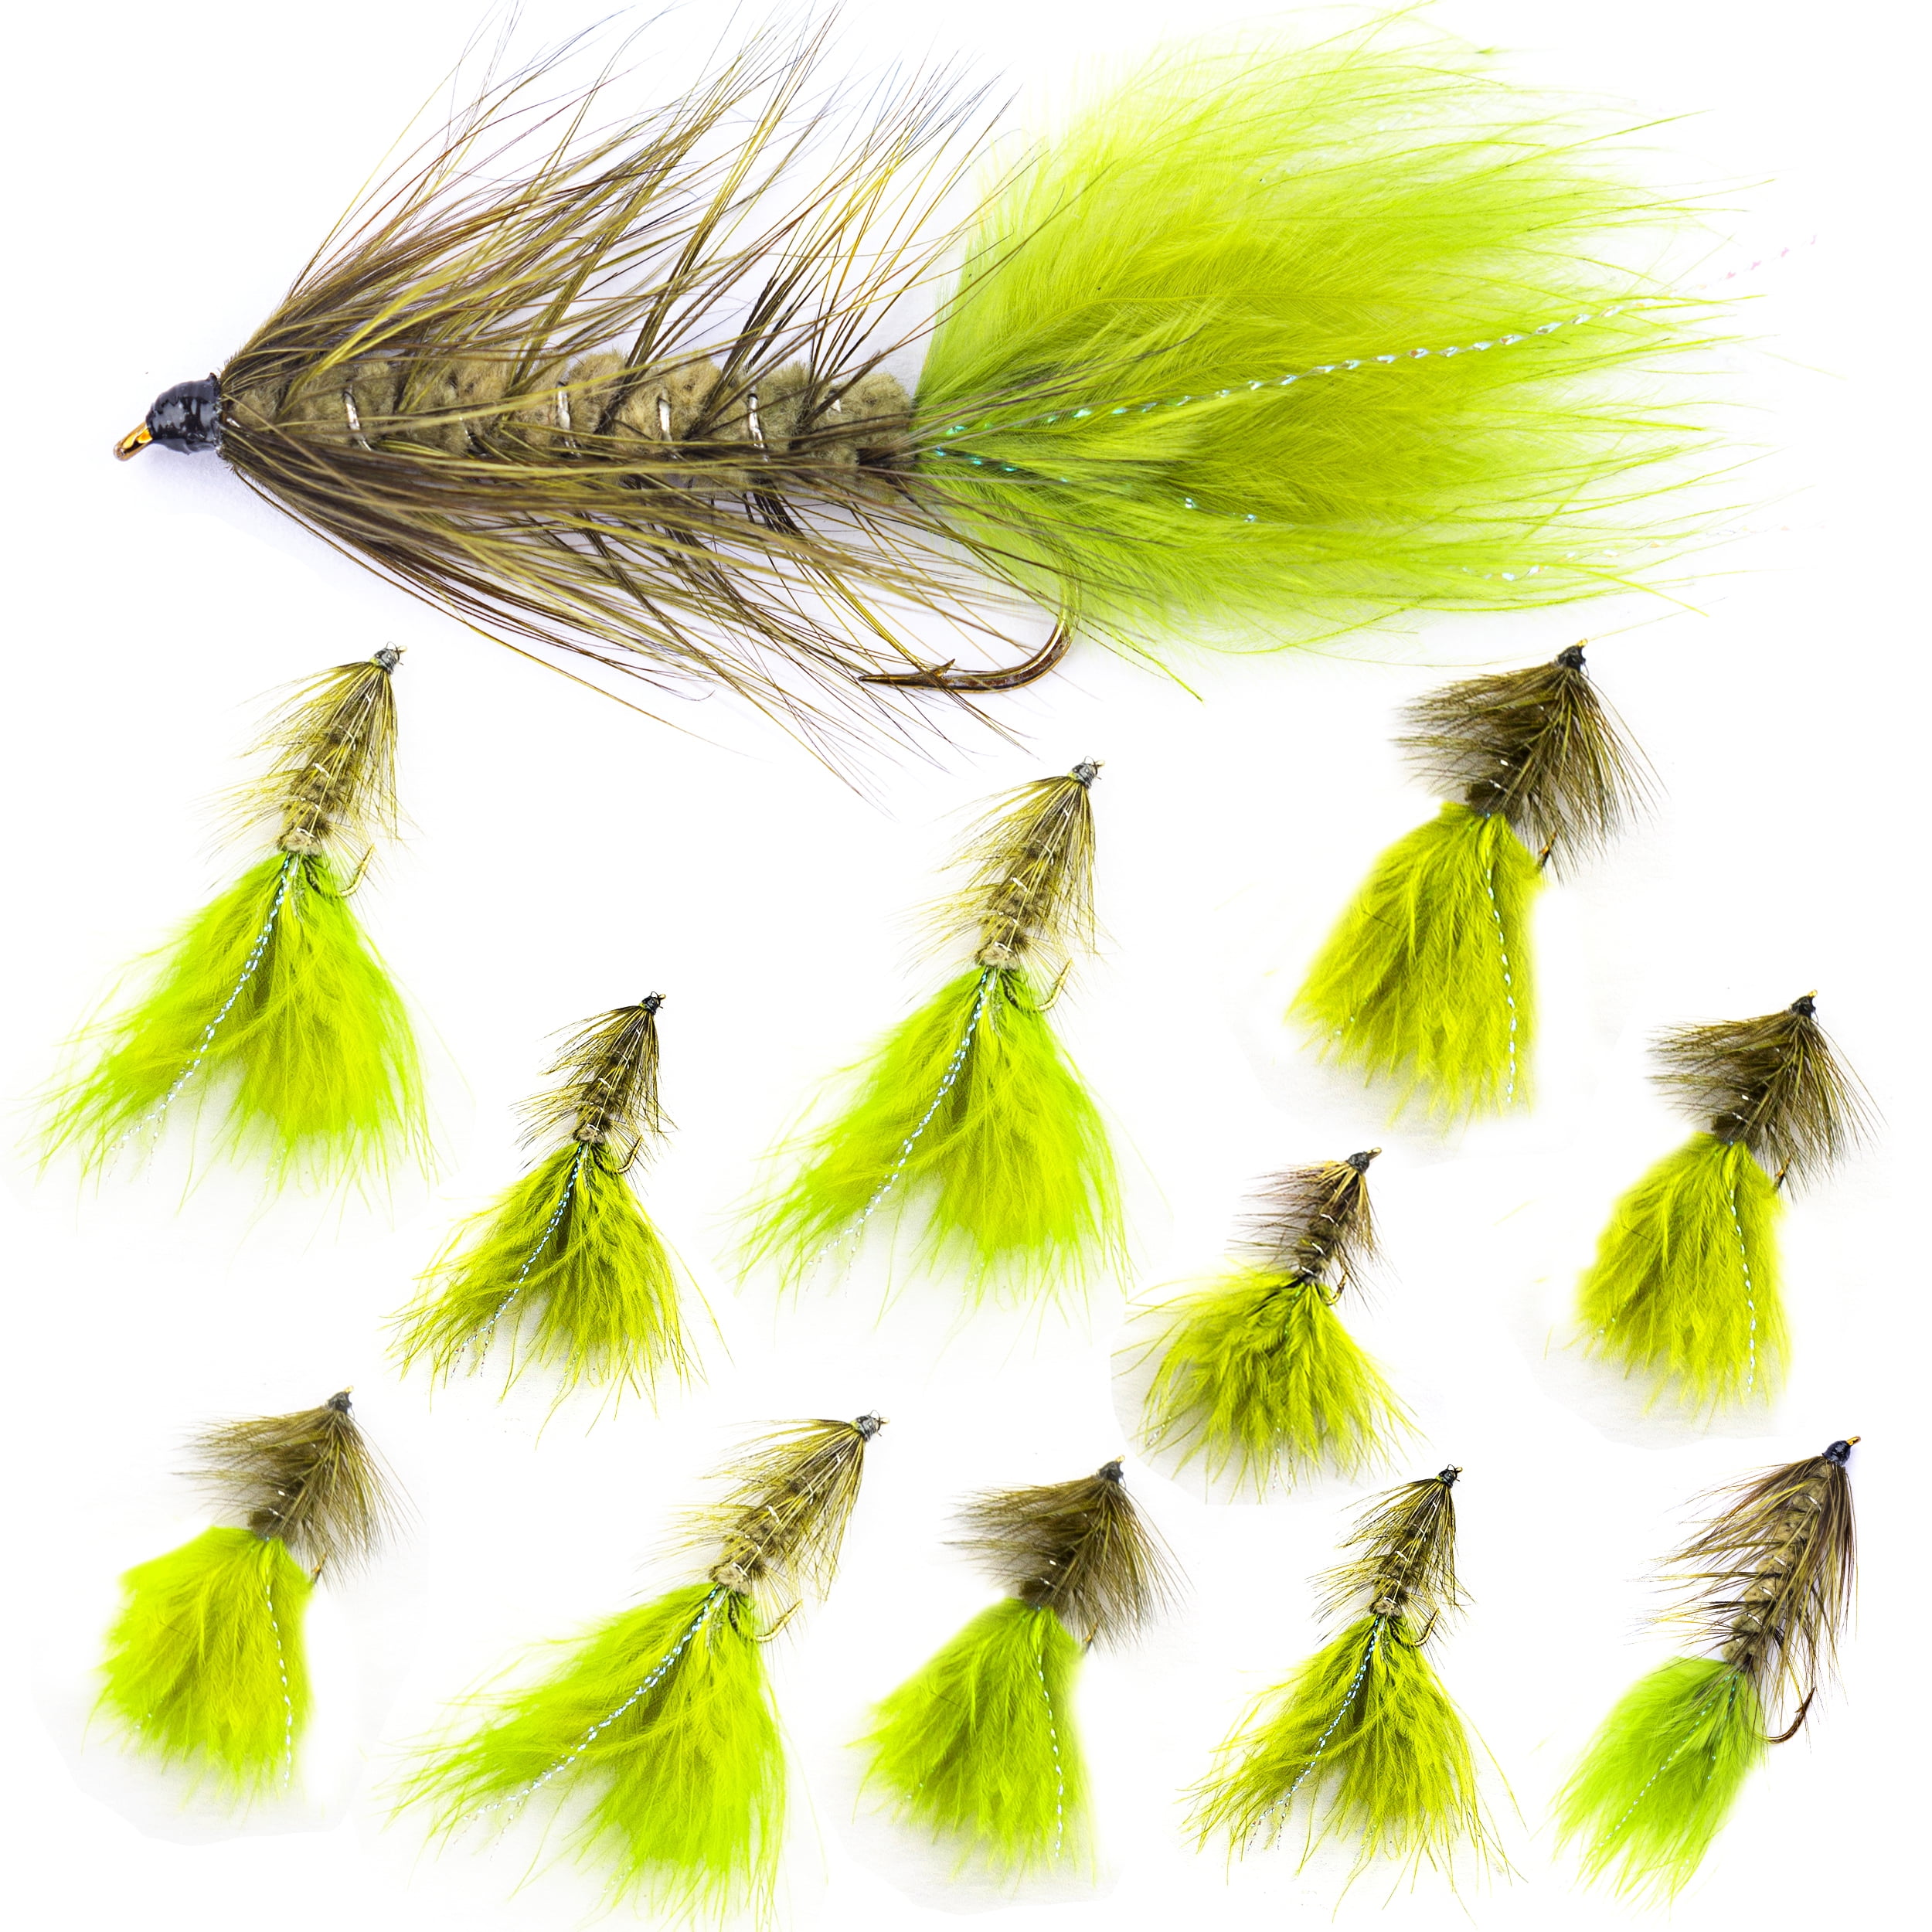 School of Fly Fishing, Wooly Bugger Flies, 12 PC Trout Fly Fishing  Streamer Pack, Size 4, 6, 8, 10